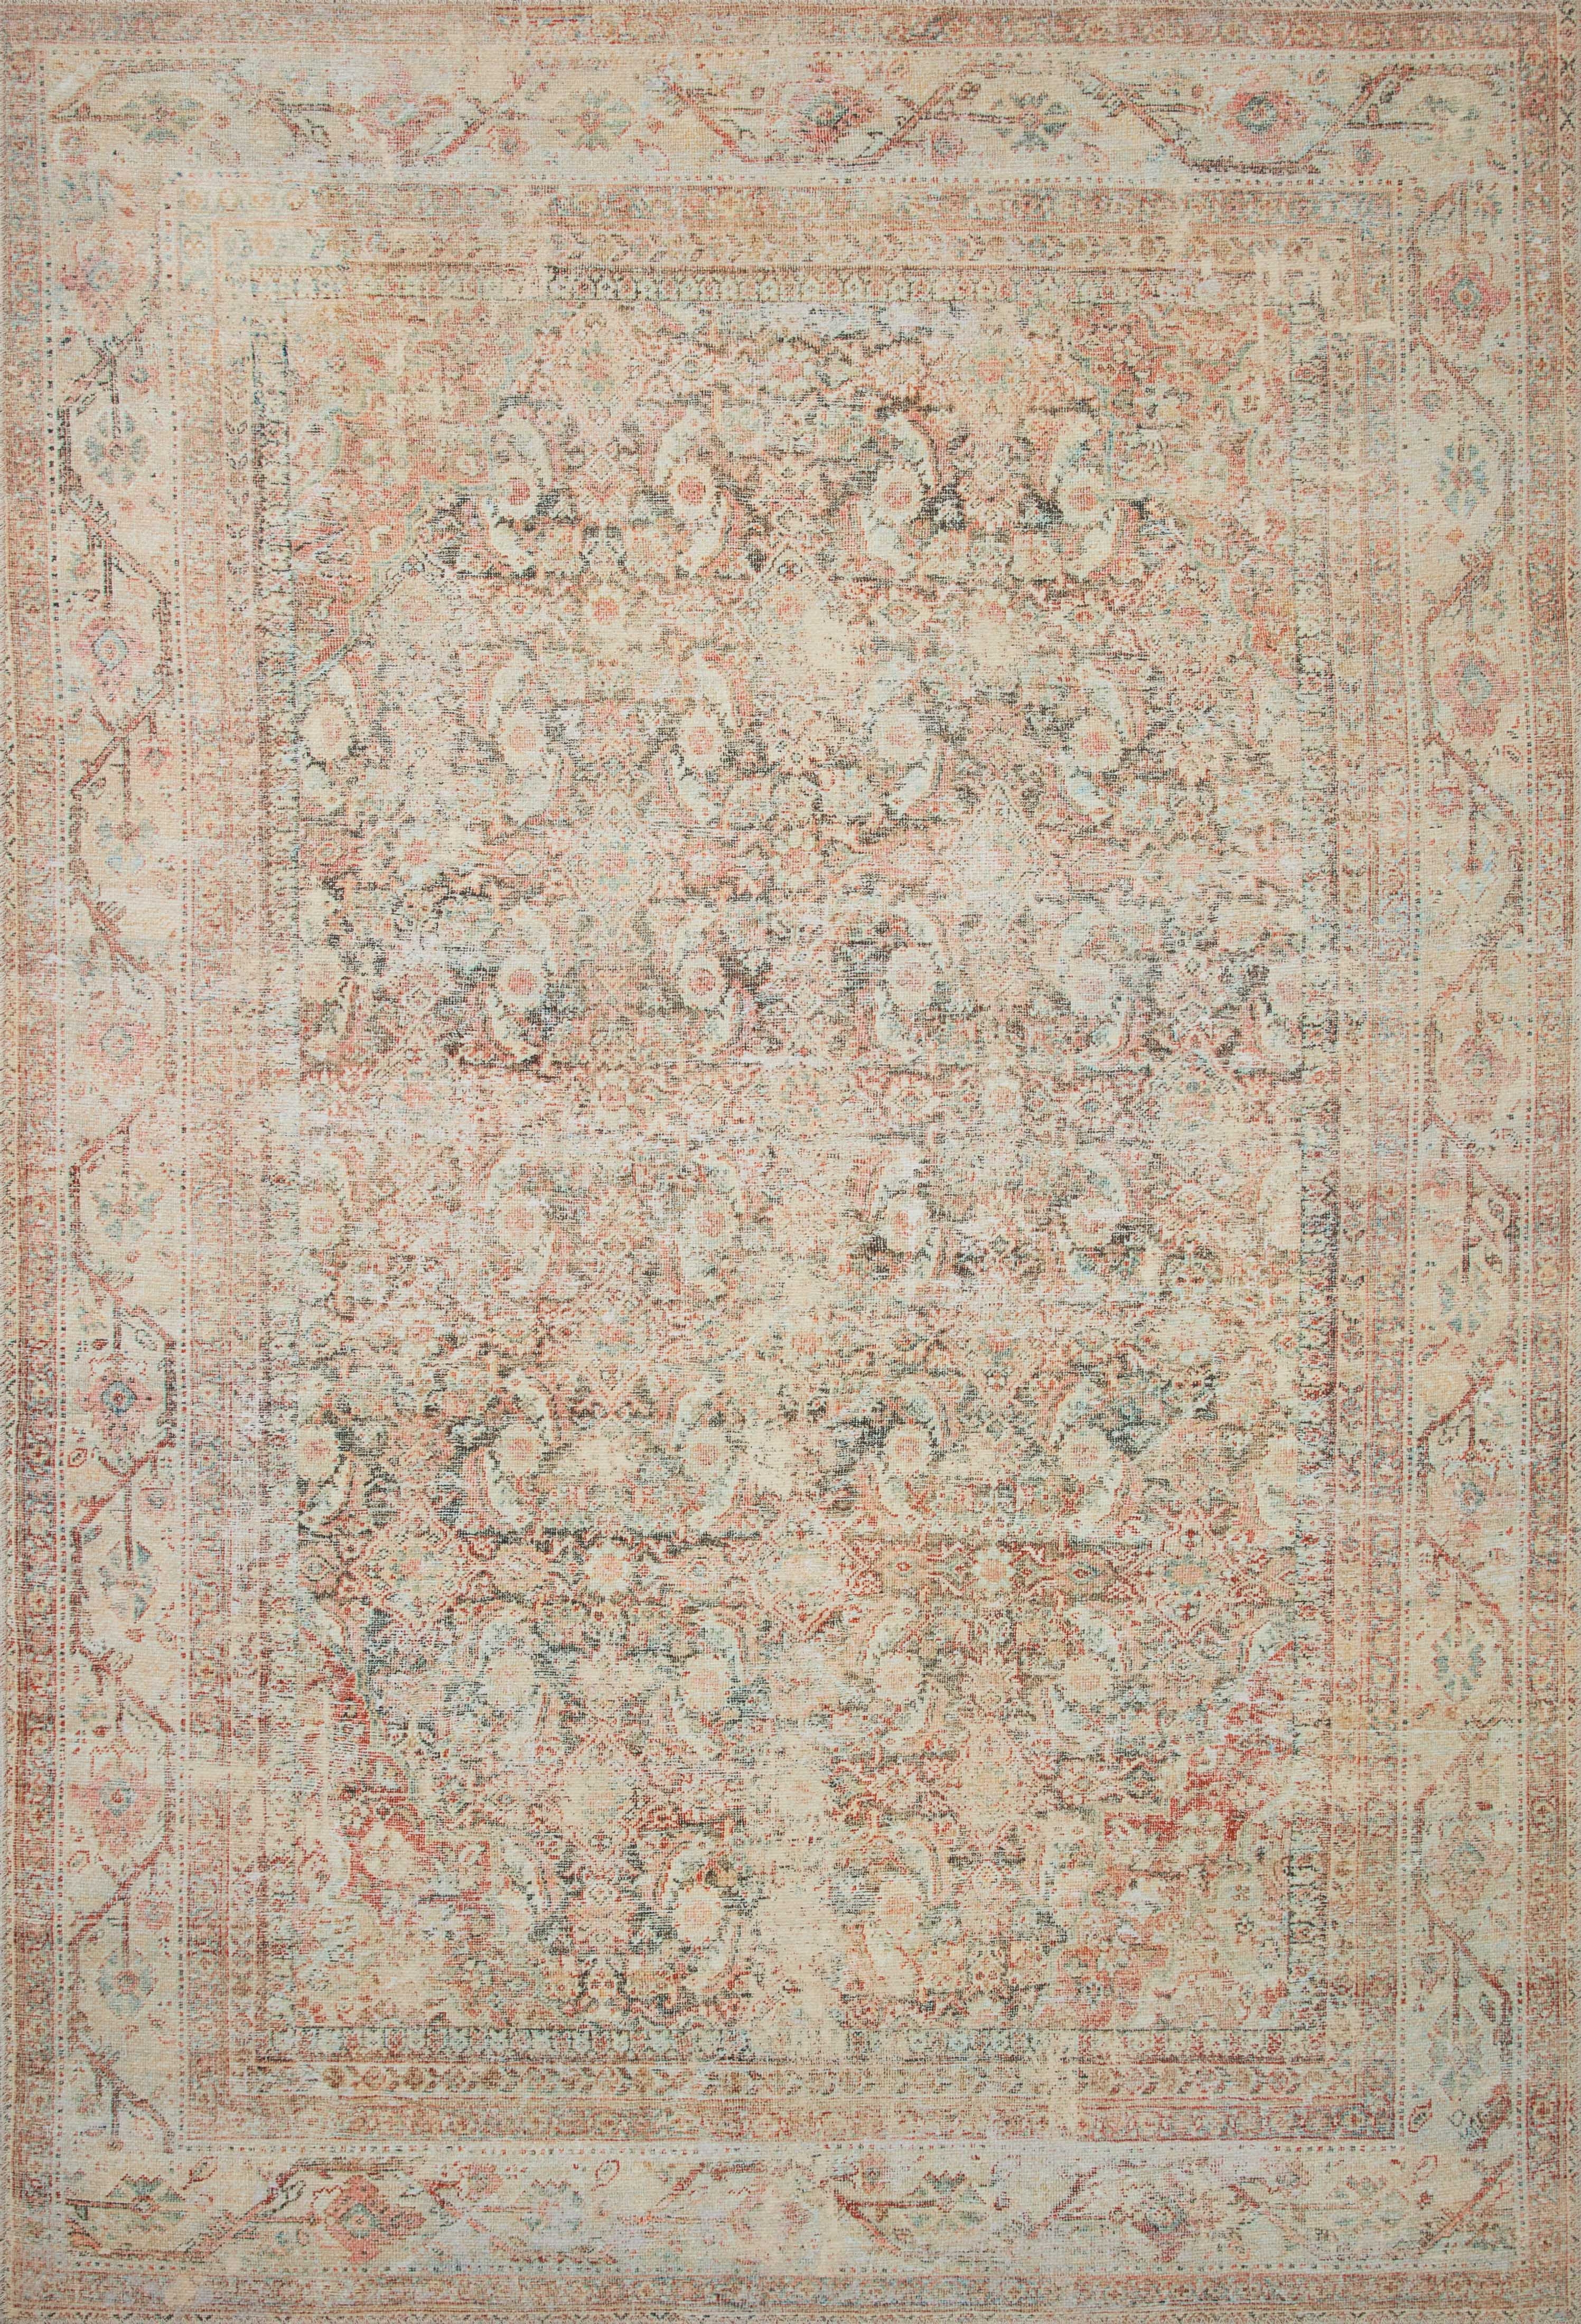 ADRIAN ADR-01 NATURAL / APRICOT 2'-6" x 12'-0" - Image 1